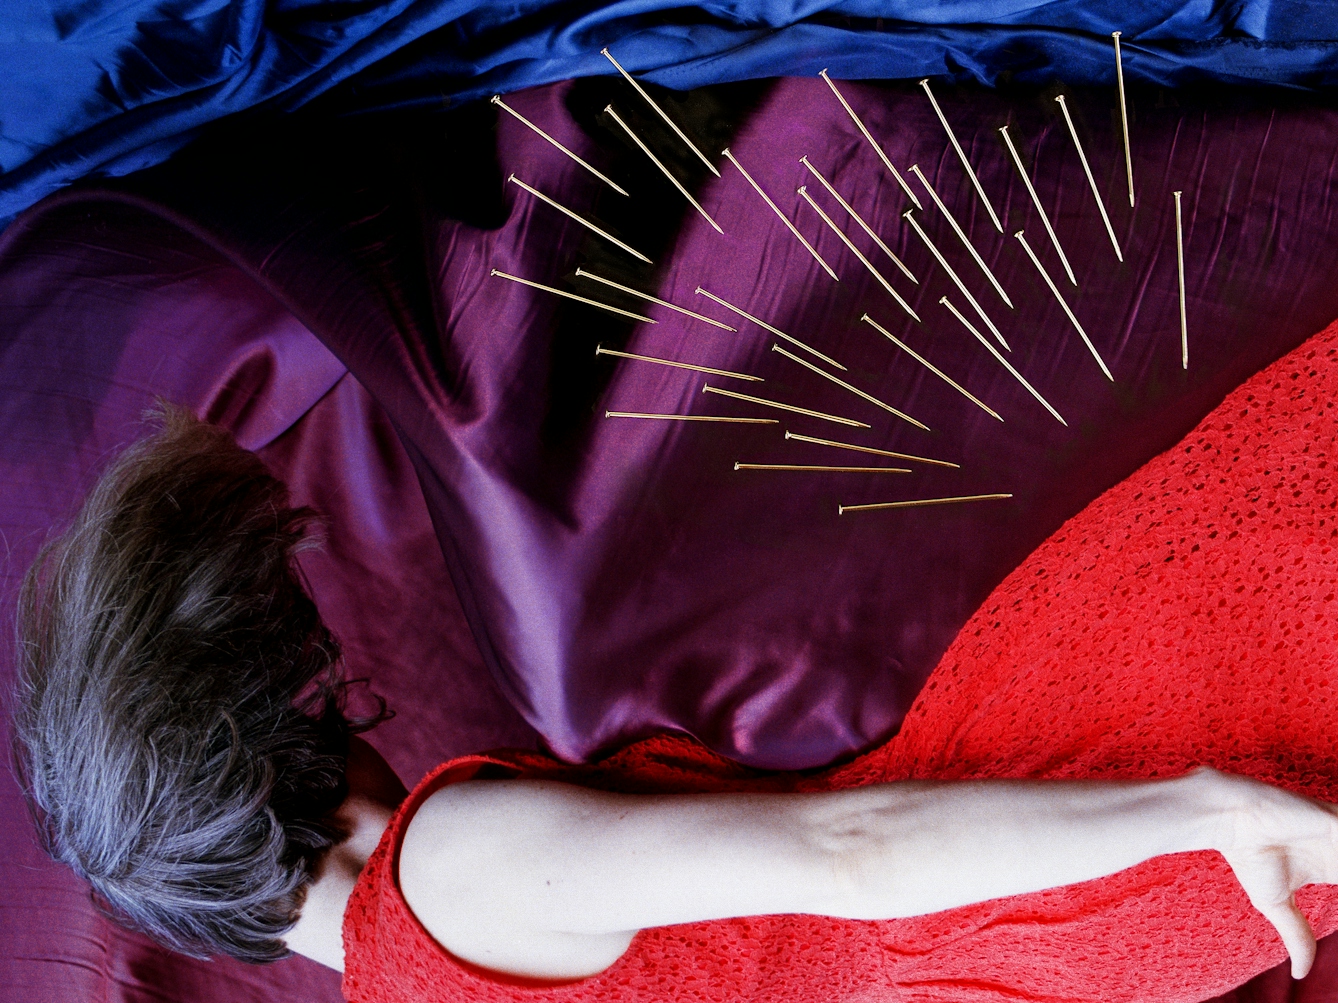 Detail from a larger artwork created with a colour photographic print of a female figure in a bright red dress, set against a purple and blue draped silk background. She is lying horizontal in the frame. Her face is obscured by her hair. Her body is surrounded by groups of dress pins, laid on top of the photographic print. The pins are arranged as if they are a flight of arrows directed at her body. One group attacks her back from underneath.